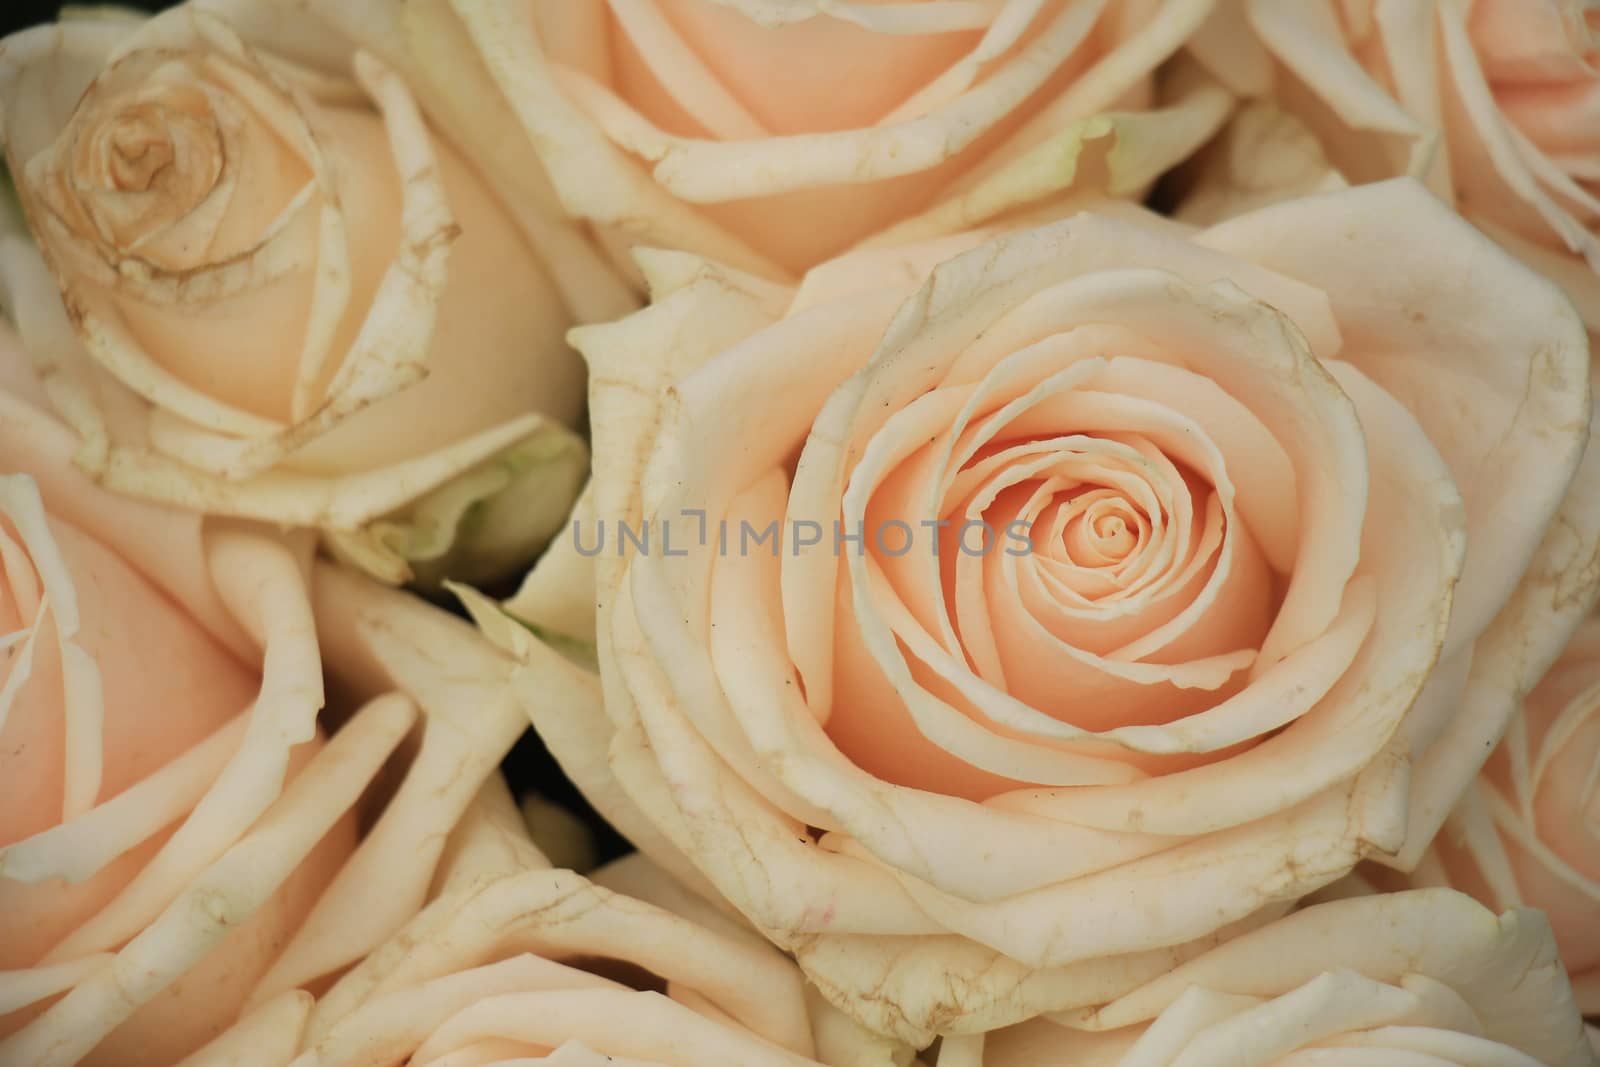 Pale pink roses in a floral arrangement at a wedding